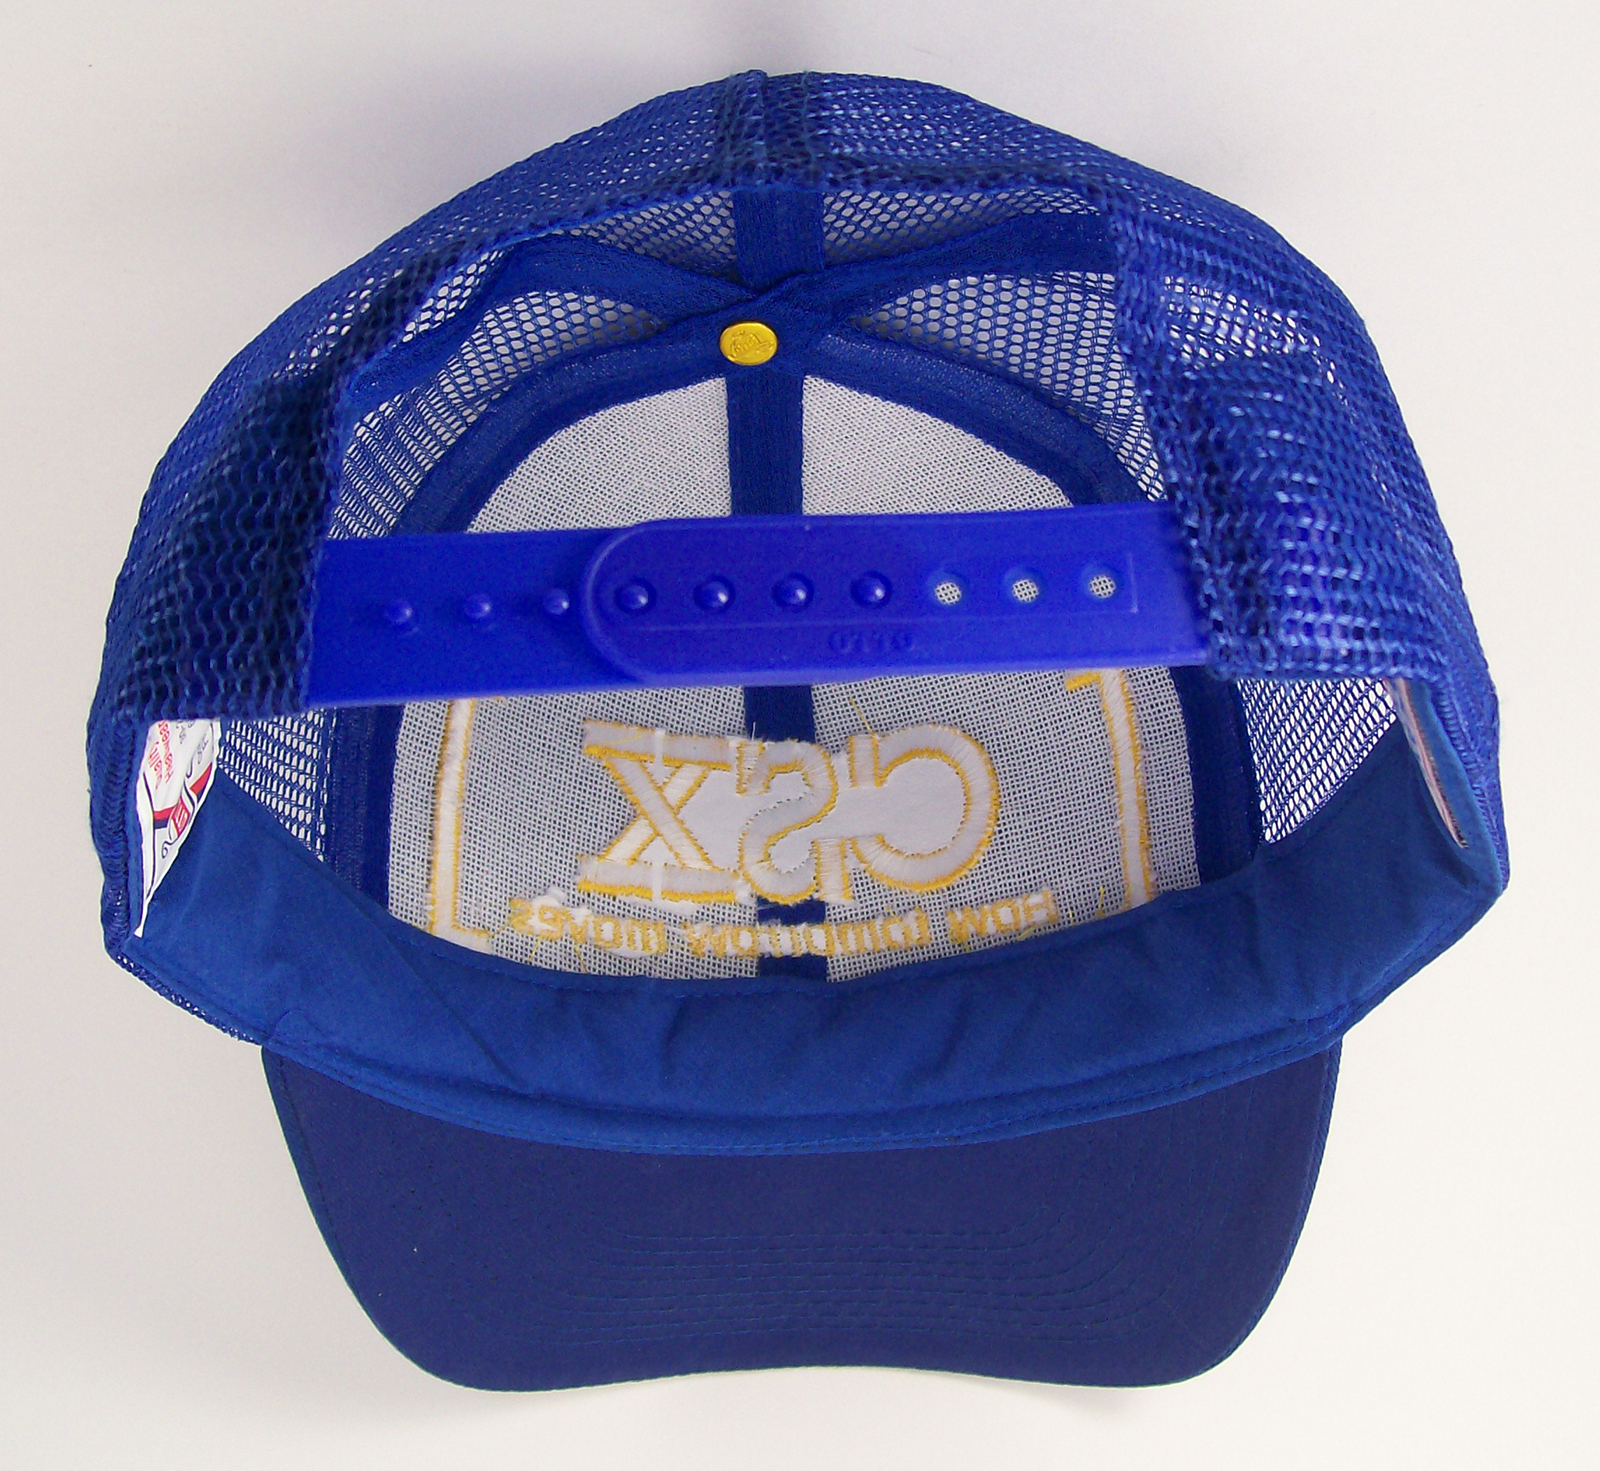 CSX Railroad How Tomorrow Moves Embroidered Mesh Cap Hat #40-3905RM